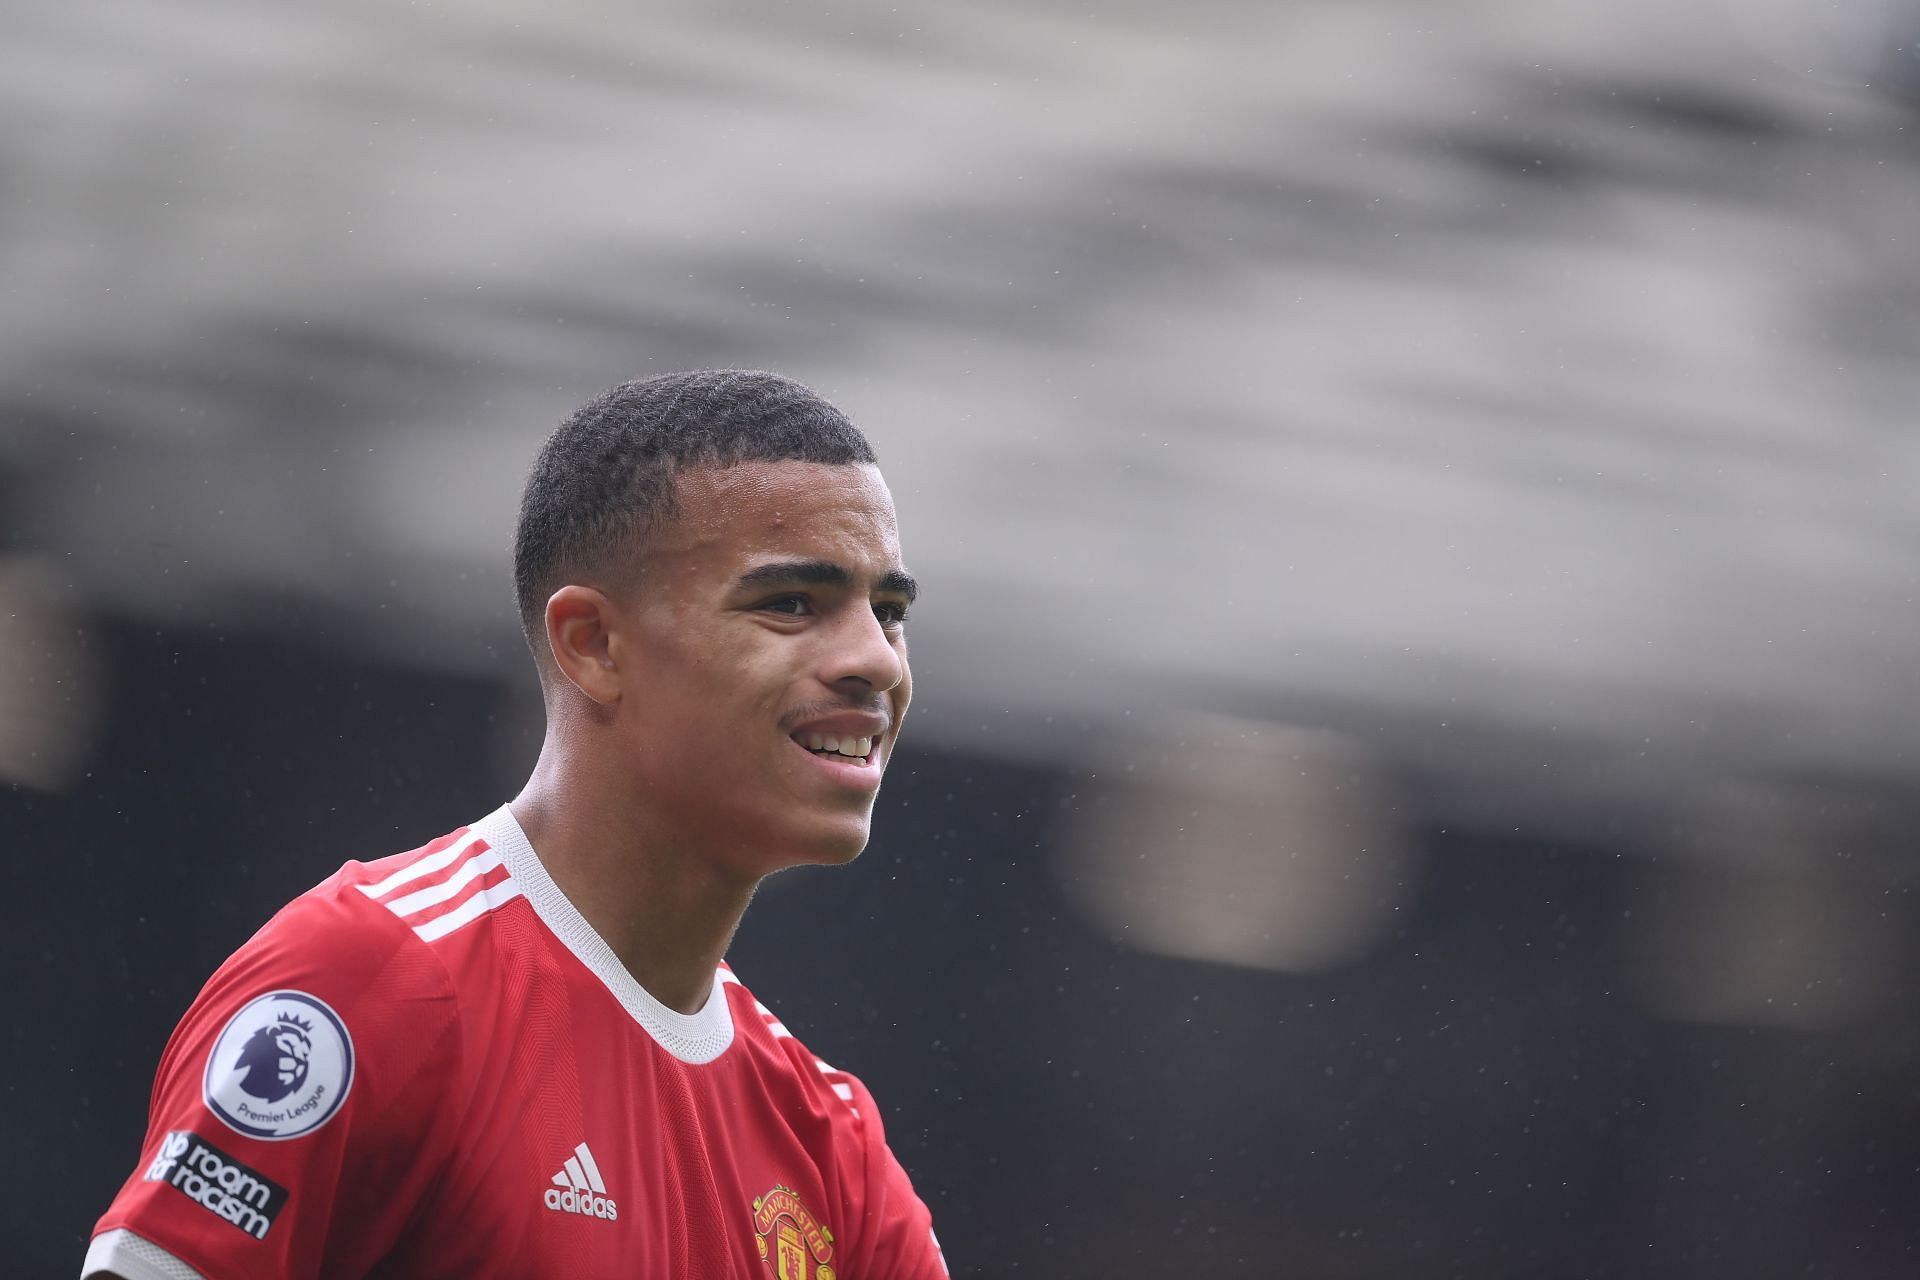 Mason Greenwood was not part of Manchester United